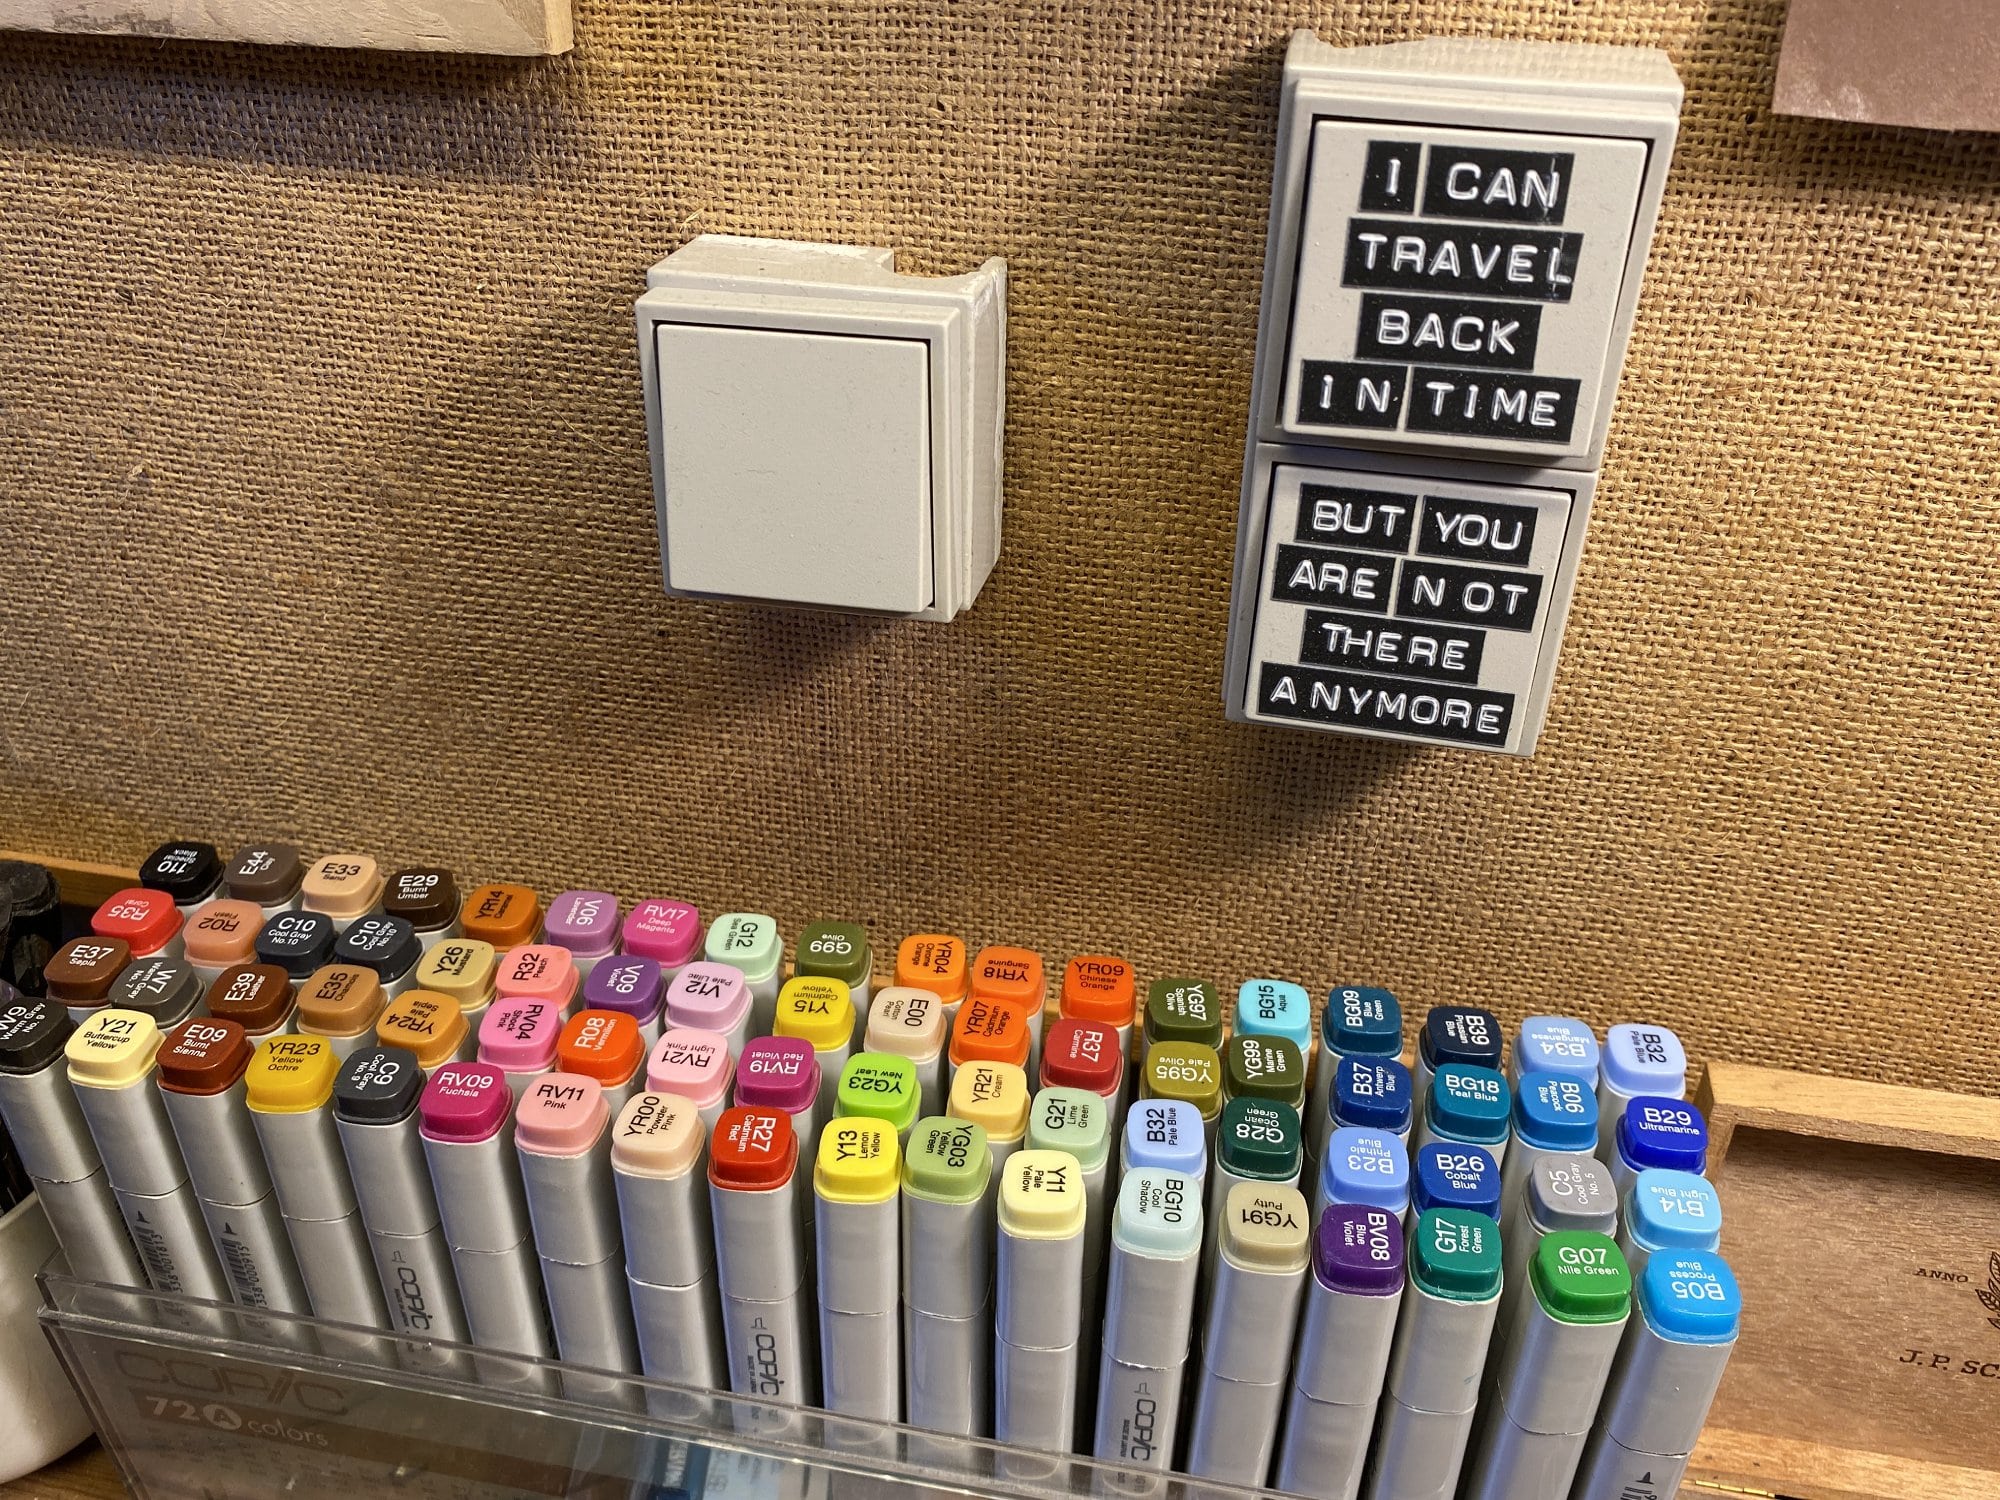 A set of Copic markers and letters on a switch that read “I can travel back in time, but you are not there anymore”